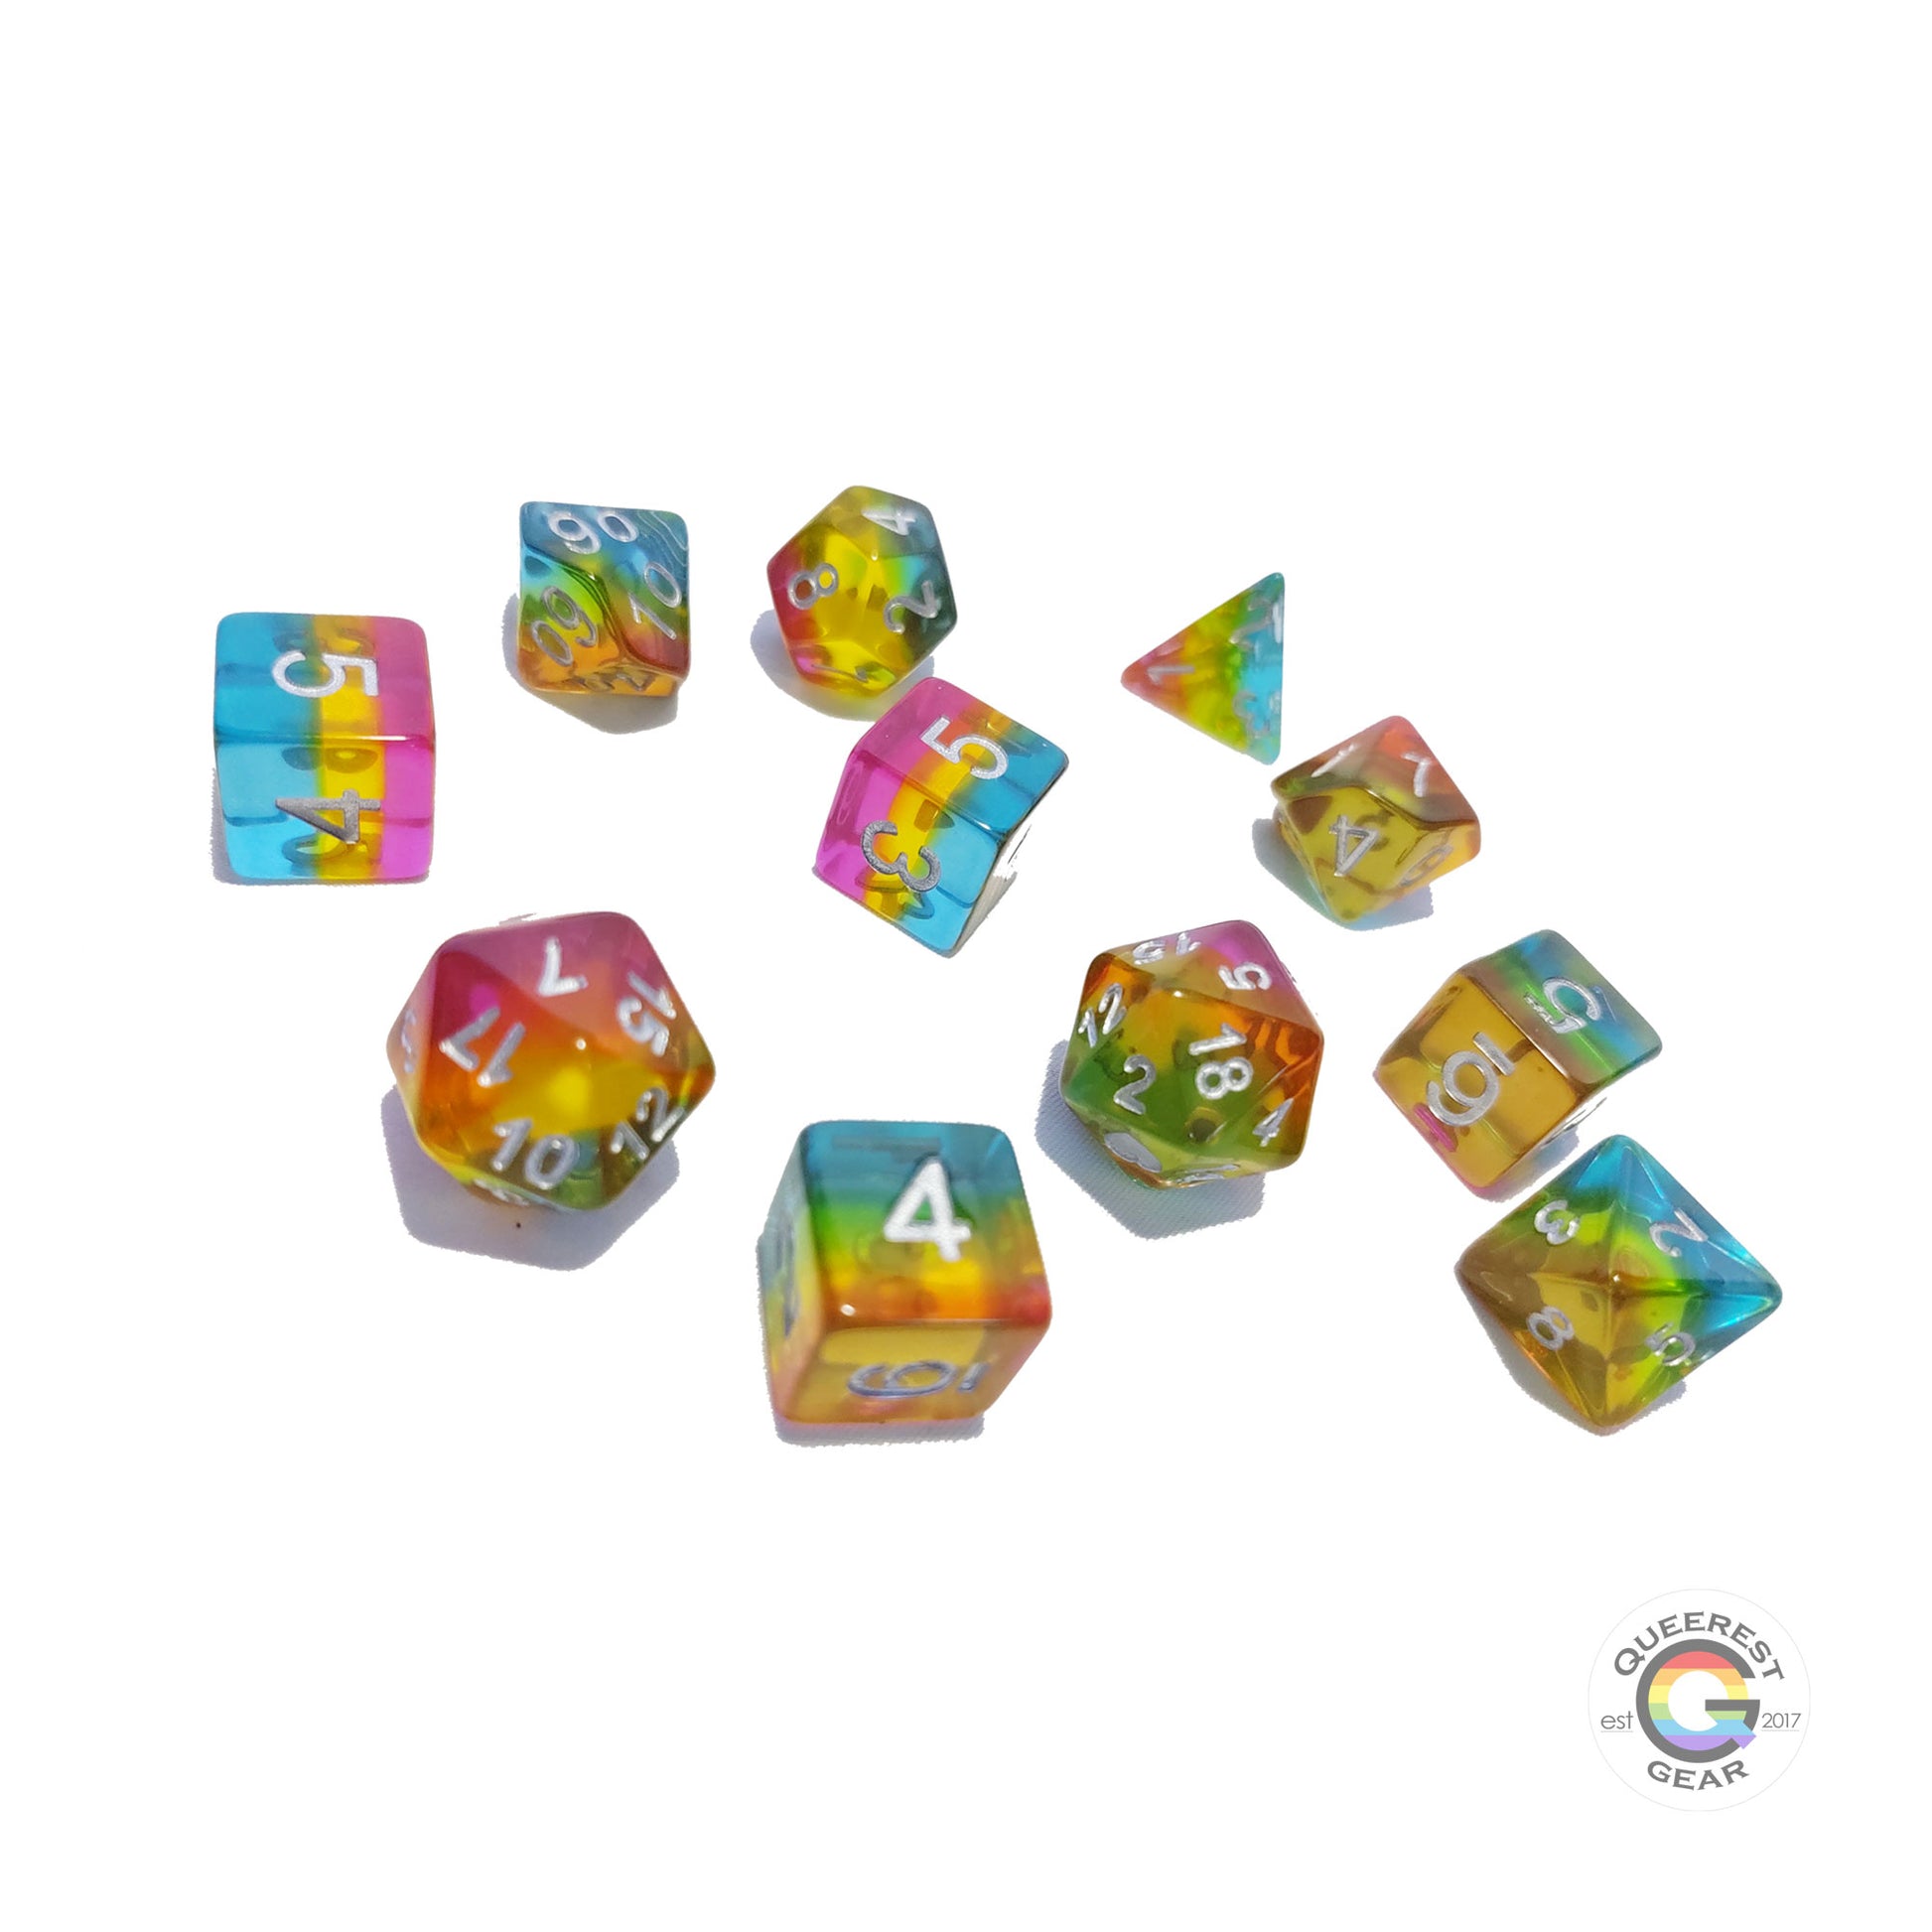 11 piece set of pansexual dice scattered on a white background. They are transparent and colored in the stripes of the nonbinary flag with silver ink